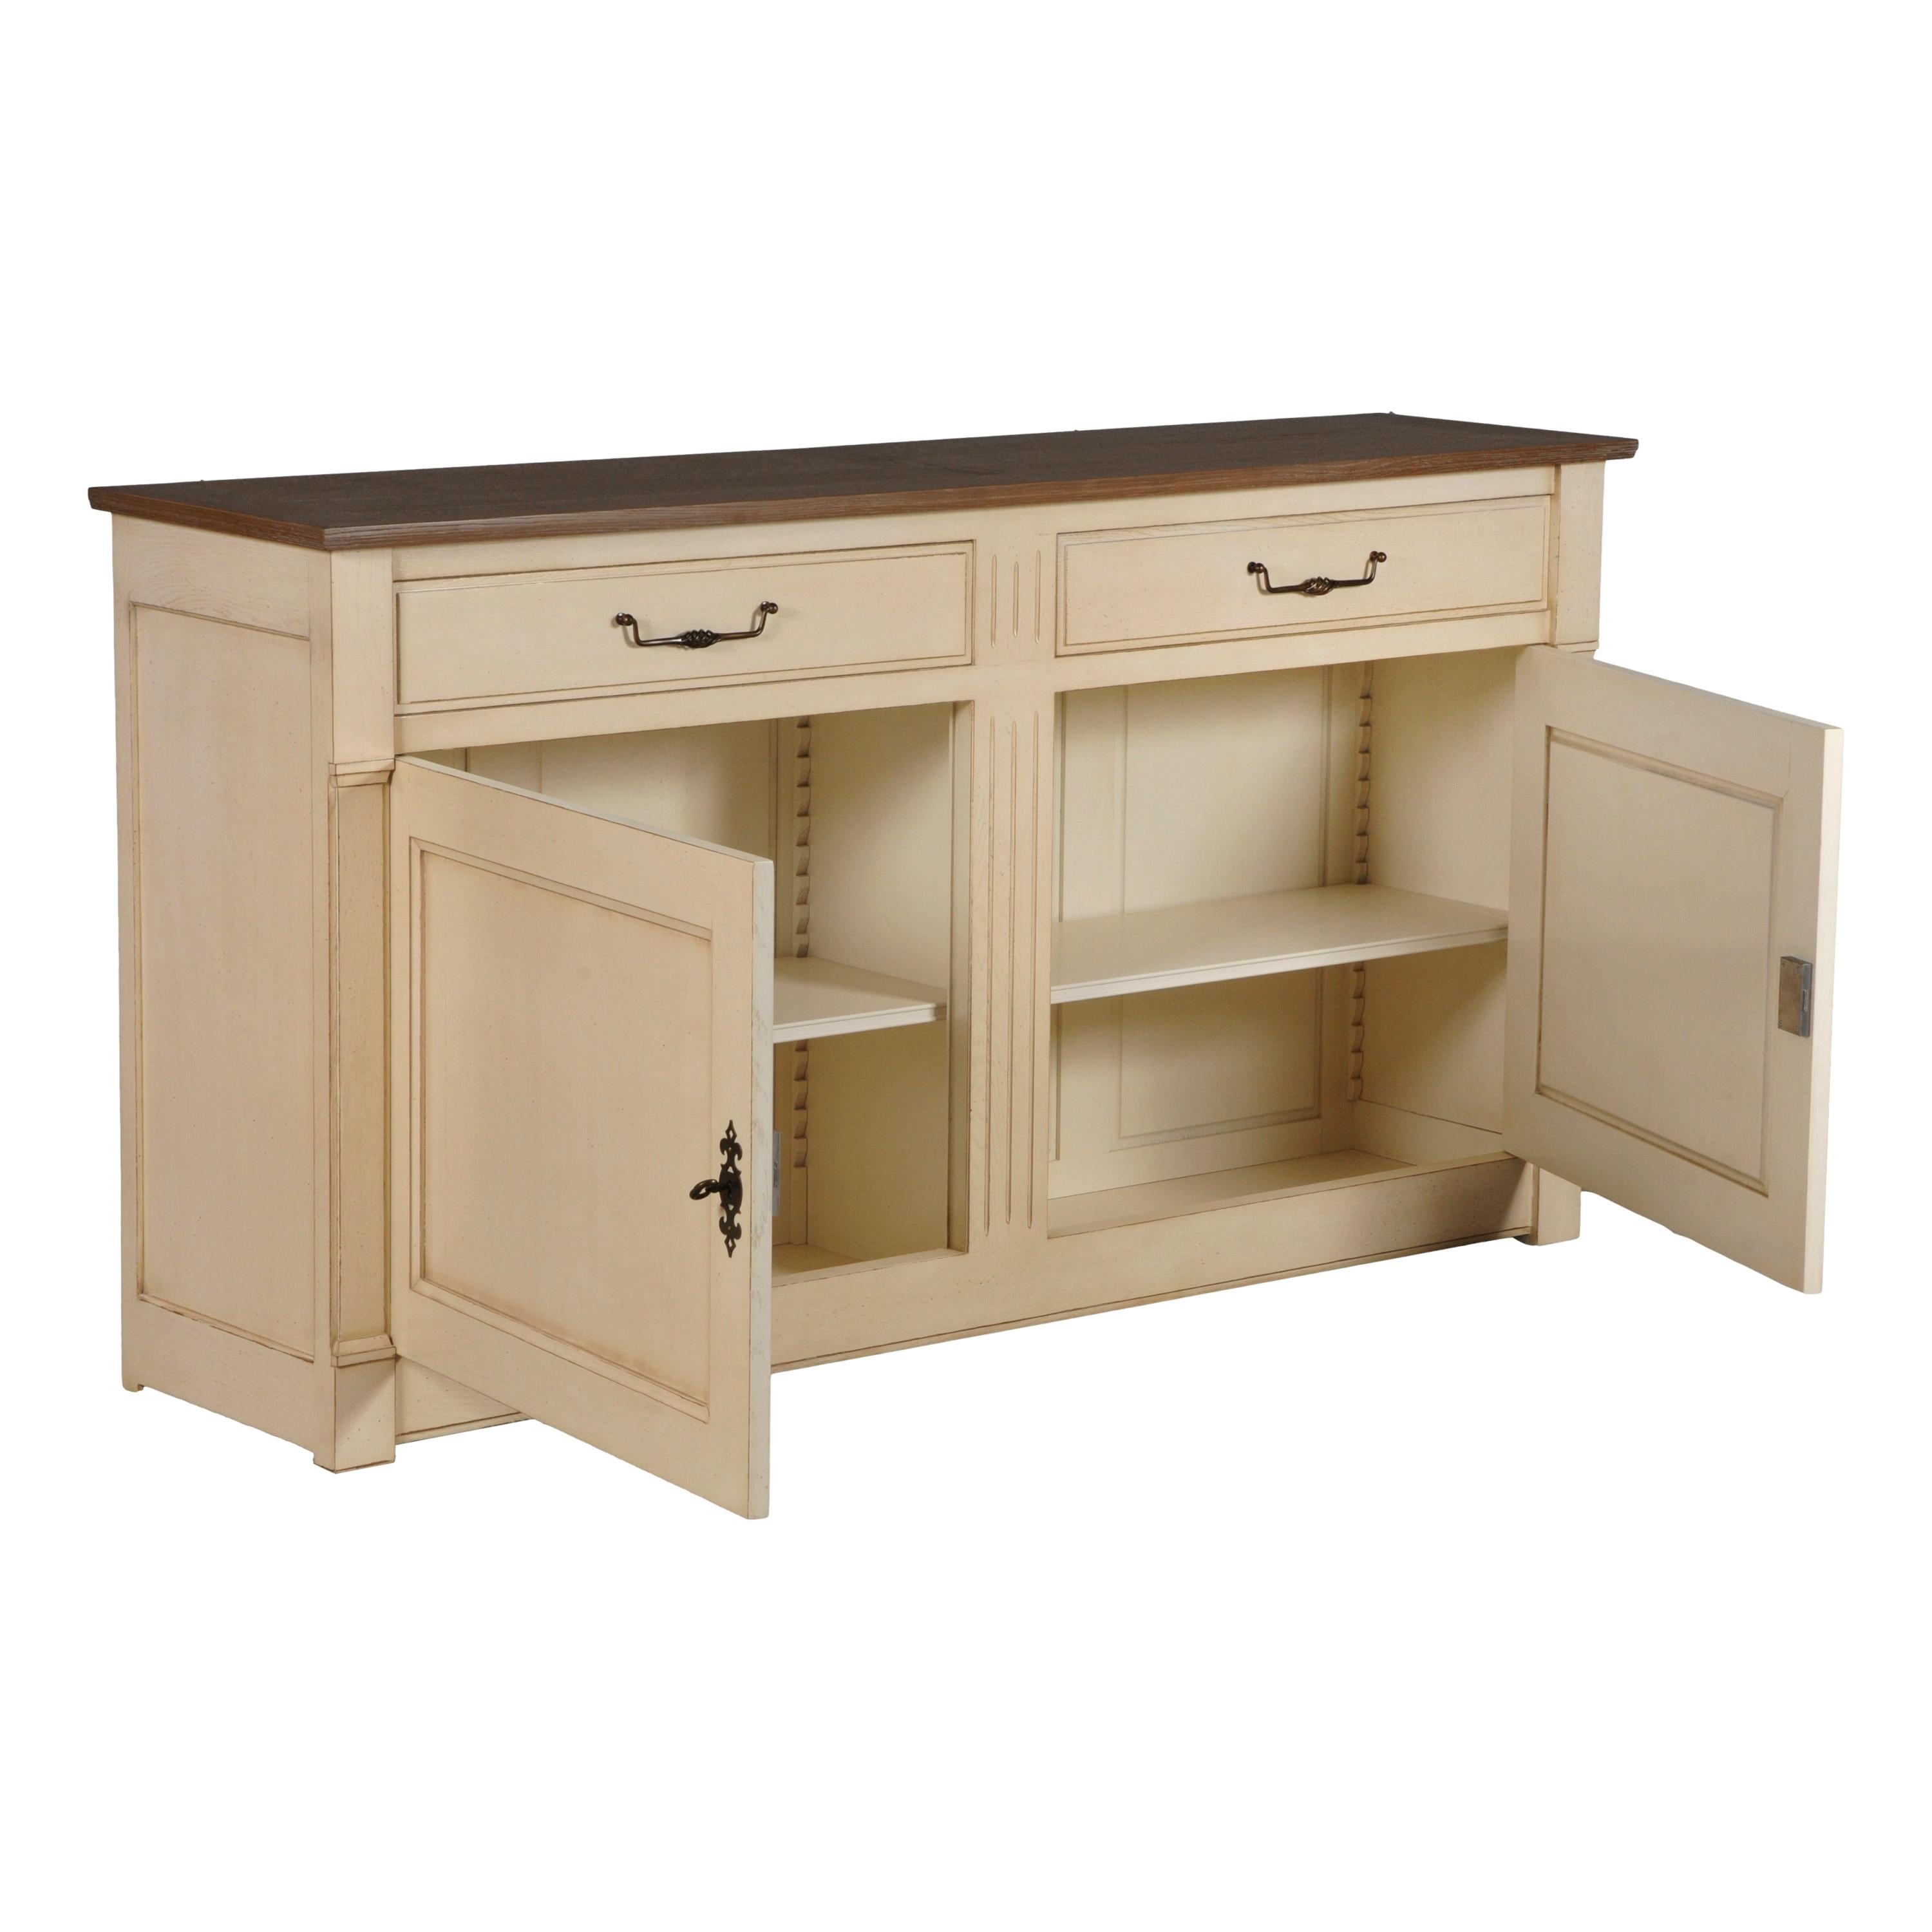 This sideboard belongs to our Rive Gauche Collection, very elegant and full of charm in a typical French countryside classical style. 

The Top is royal dark brown stained and the rest is white-cream lacquered with a satin varnish. 

This buffet